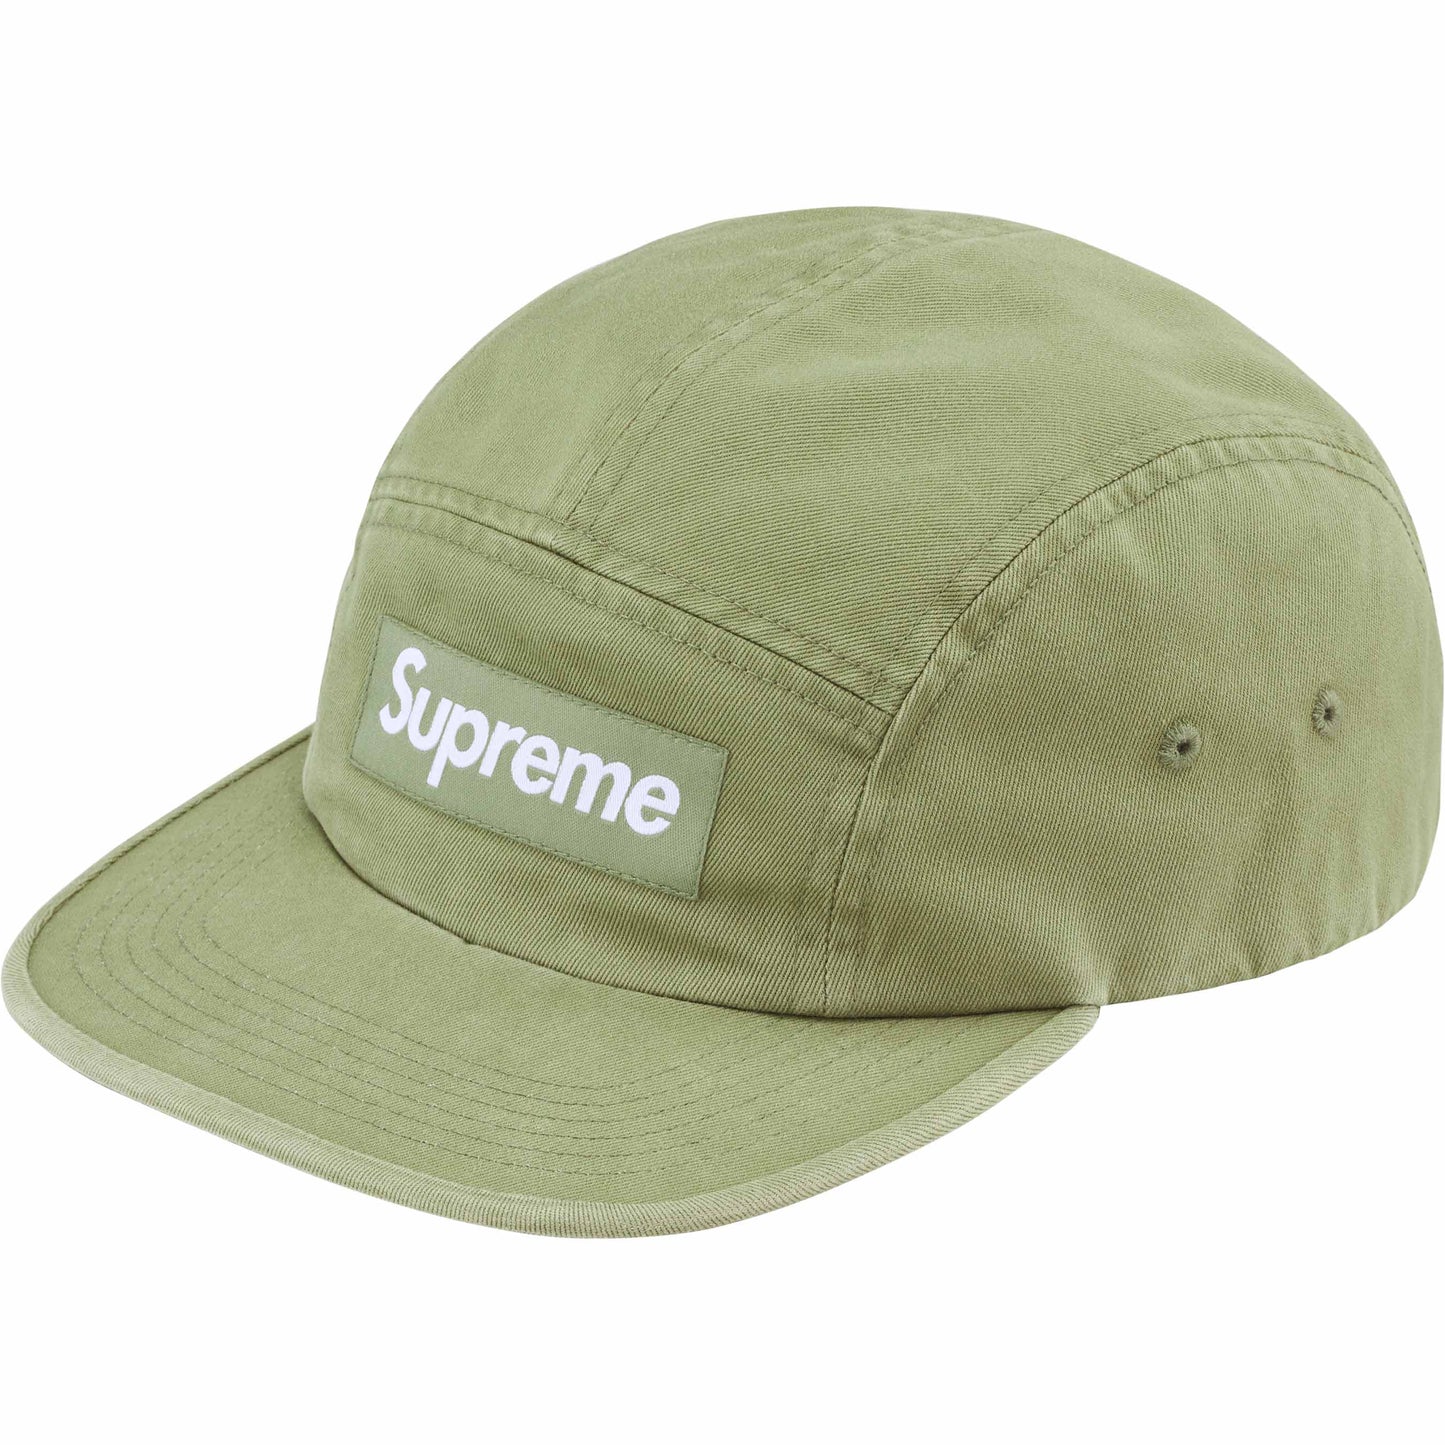 Supreme Washed Chino Twill Camp Cap "Light Olive"